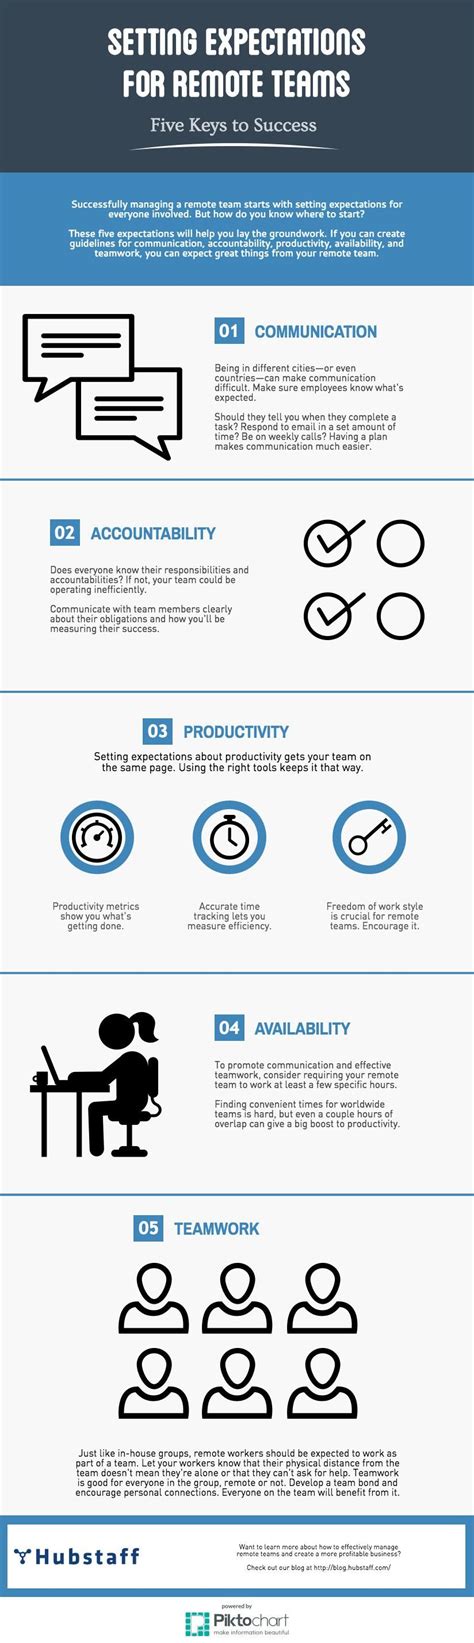 Managing Remote Teams 5 Keys To Setting Expectations Infographic Communicating What You